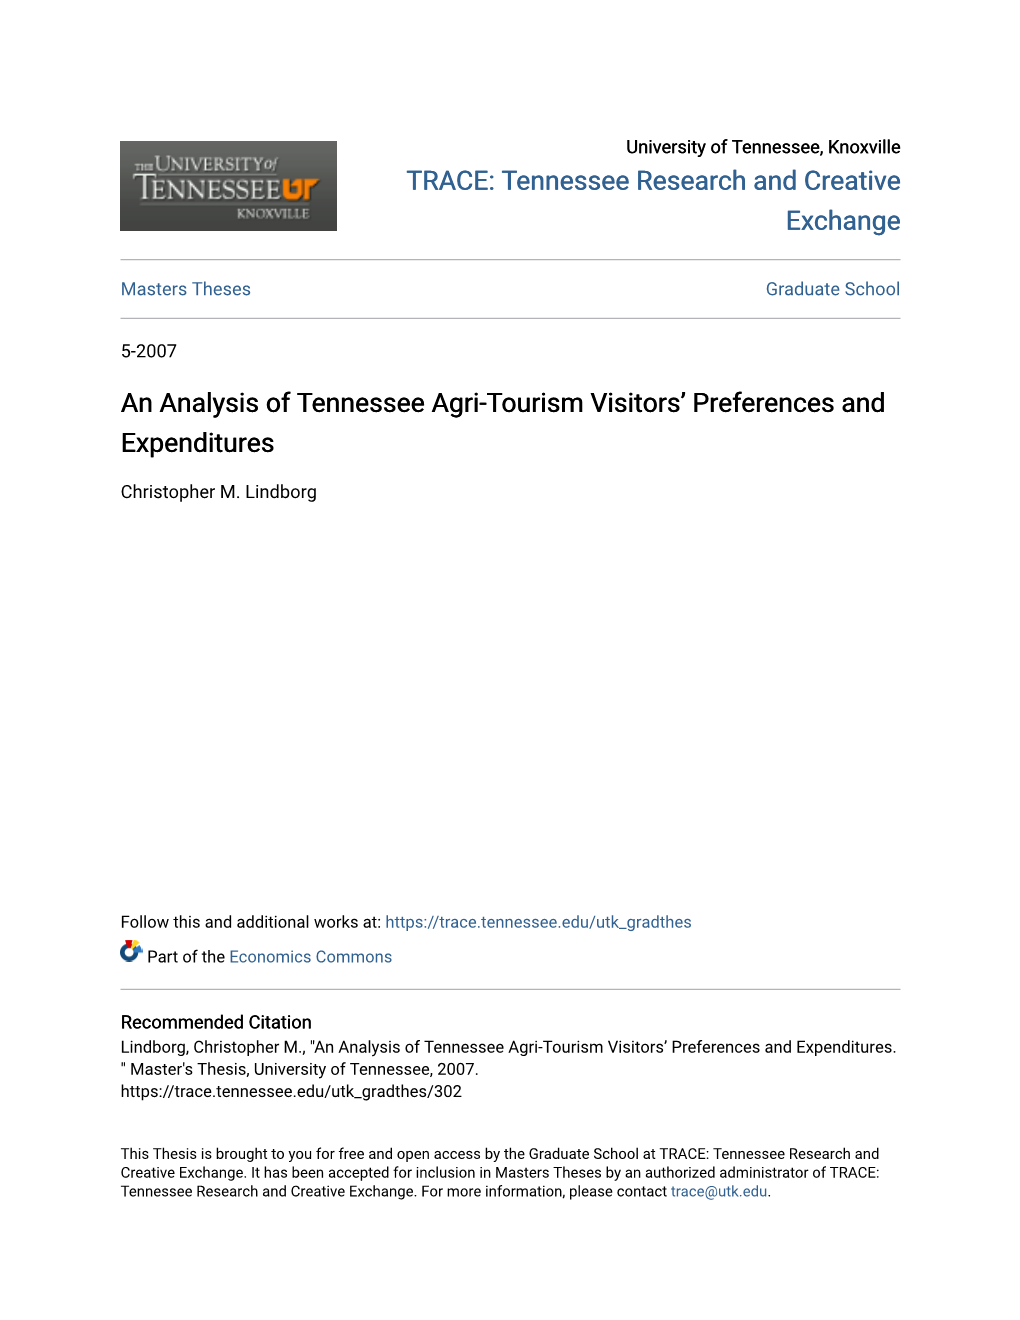 An Analysis of Tennessee Agri-Tourism Visitors' Preferences